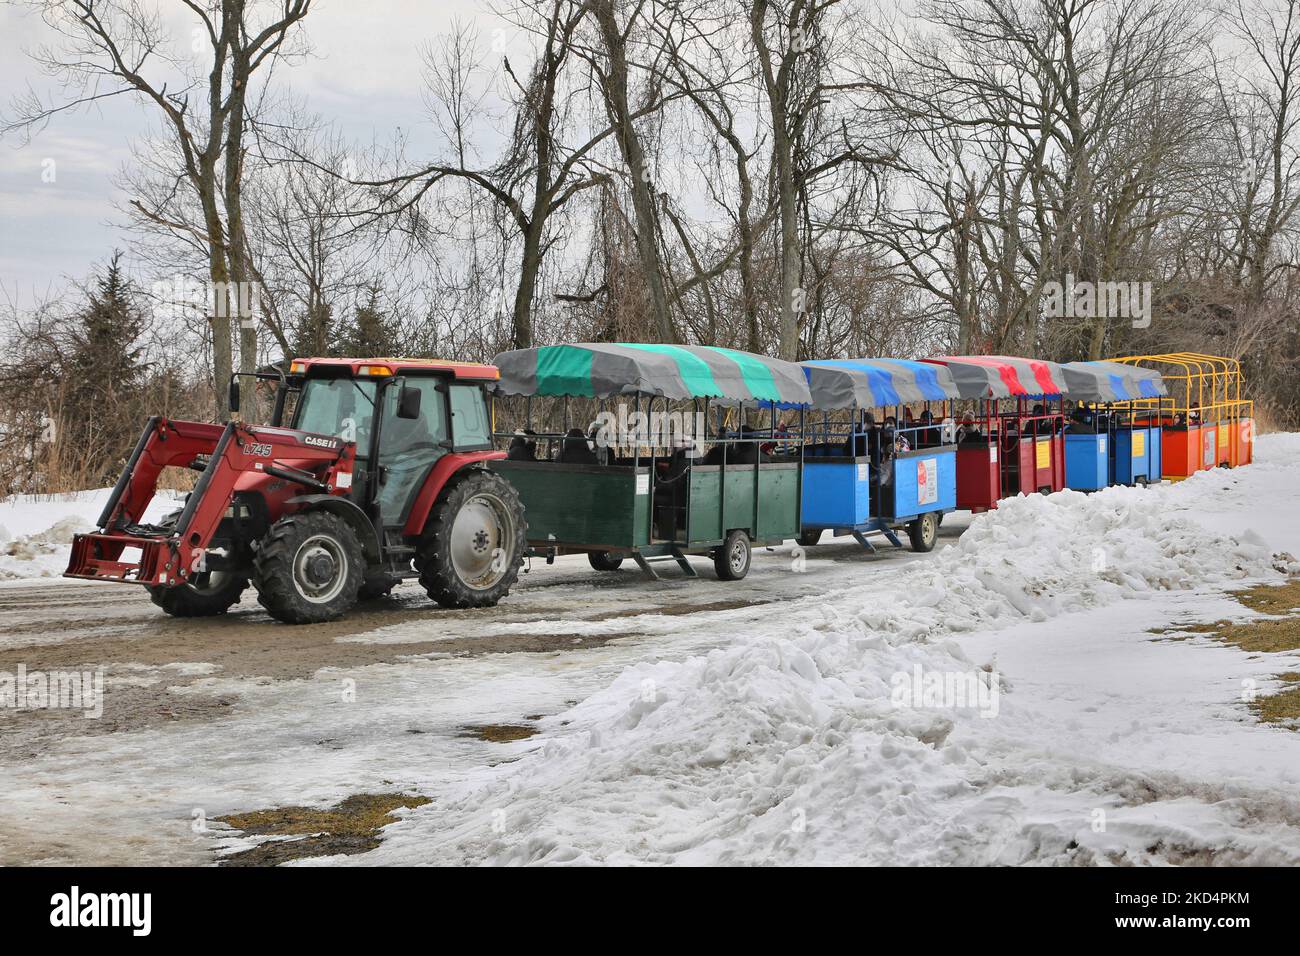 Visitors ride in cars attached to a tractor to take them to the sugarbush at a maple syrup farm during the Maple Sugar Festival in Mount Albert, Ontario, Canada, on March 05, 2022. The Maple Sugar Festival celebrates maple syrup production and products made with maple syrup and takes part at many maple syrup producing farms across Ontario and Quebec. Maple syrup is only produced in North America. (Photo by Creative Touch Imaging Ltd./NurPhoto) Stock Photo